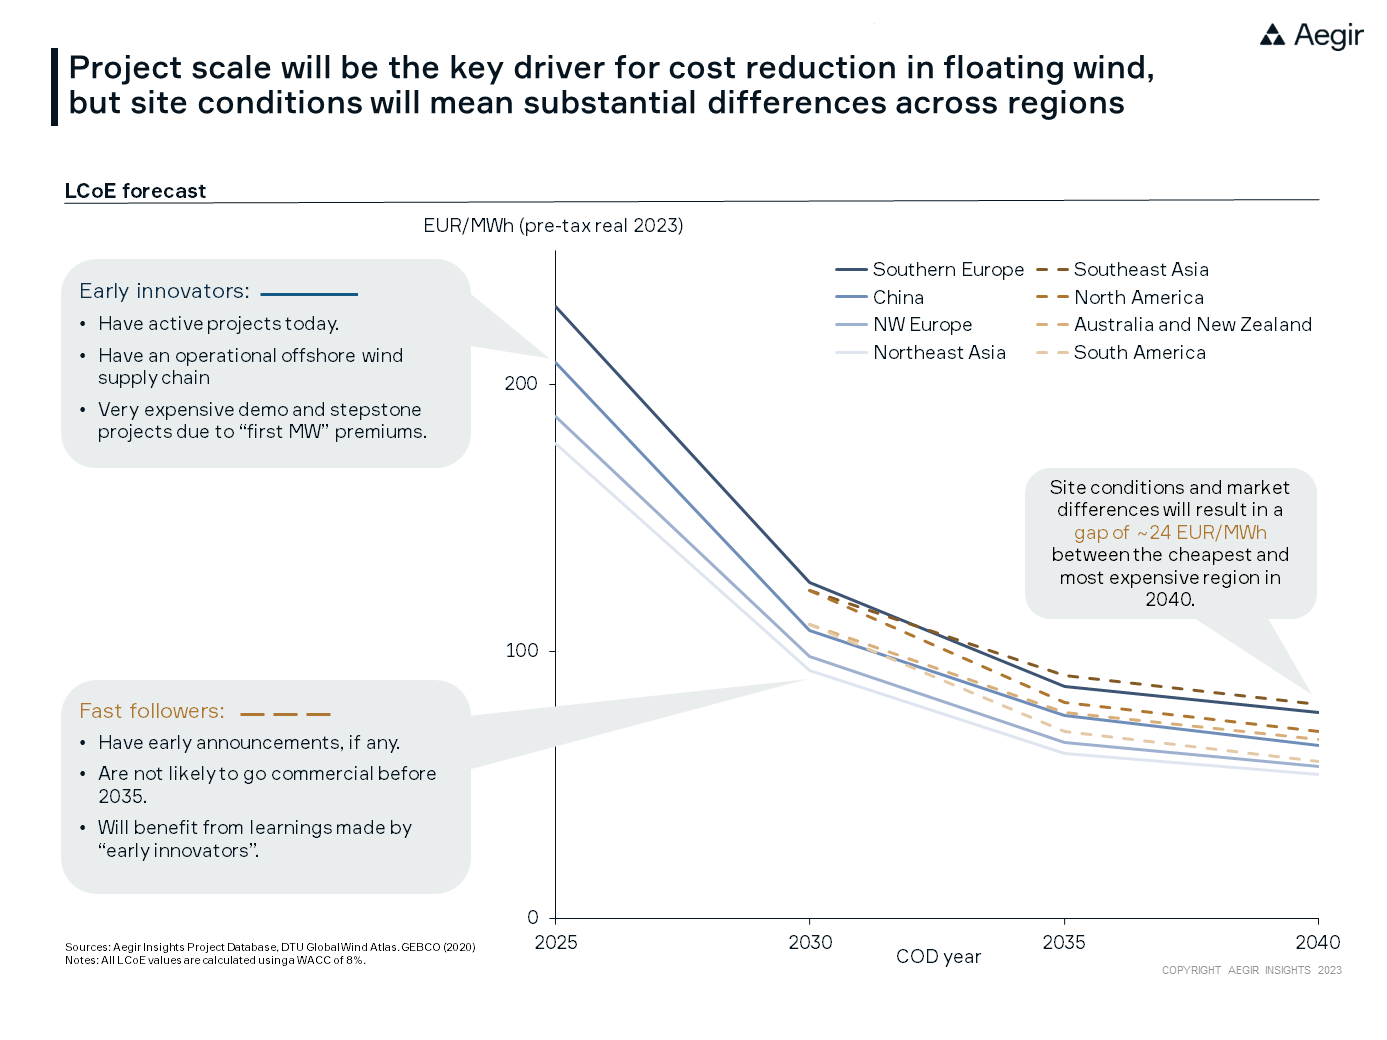 Visualization by Aegir Insights, forecasting LCoE for floating wind in different regions. Project scale will be the key driver for cost reduction in floating wind, but site conditions will mean substantial differences across regions. Early innovators will have the highest LCoE in the beginning and very expensive demo and stepstone projects due to "first MW" premiums. Fast followers are not likely to go commercial before 2035, but will benefit from learnings made by "early innovators" and will start of with a lower LCoE